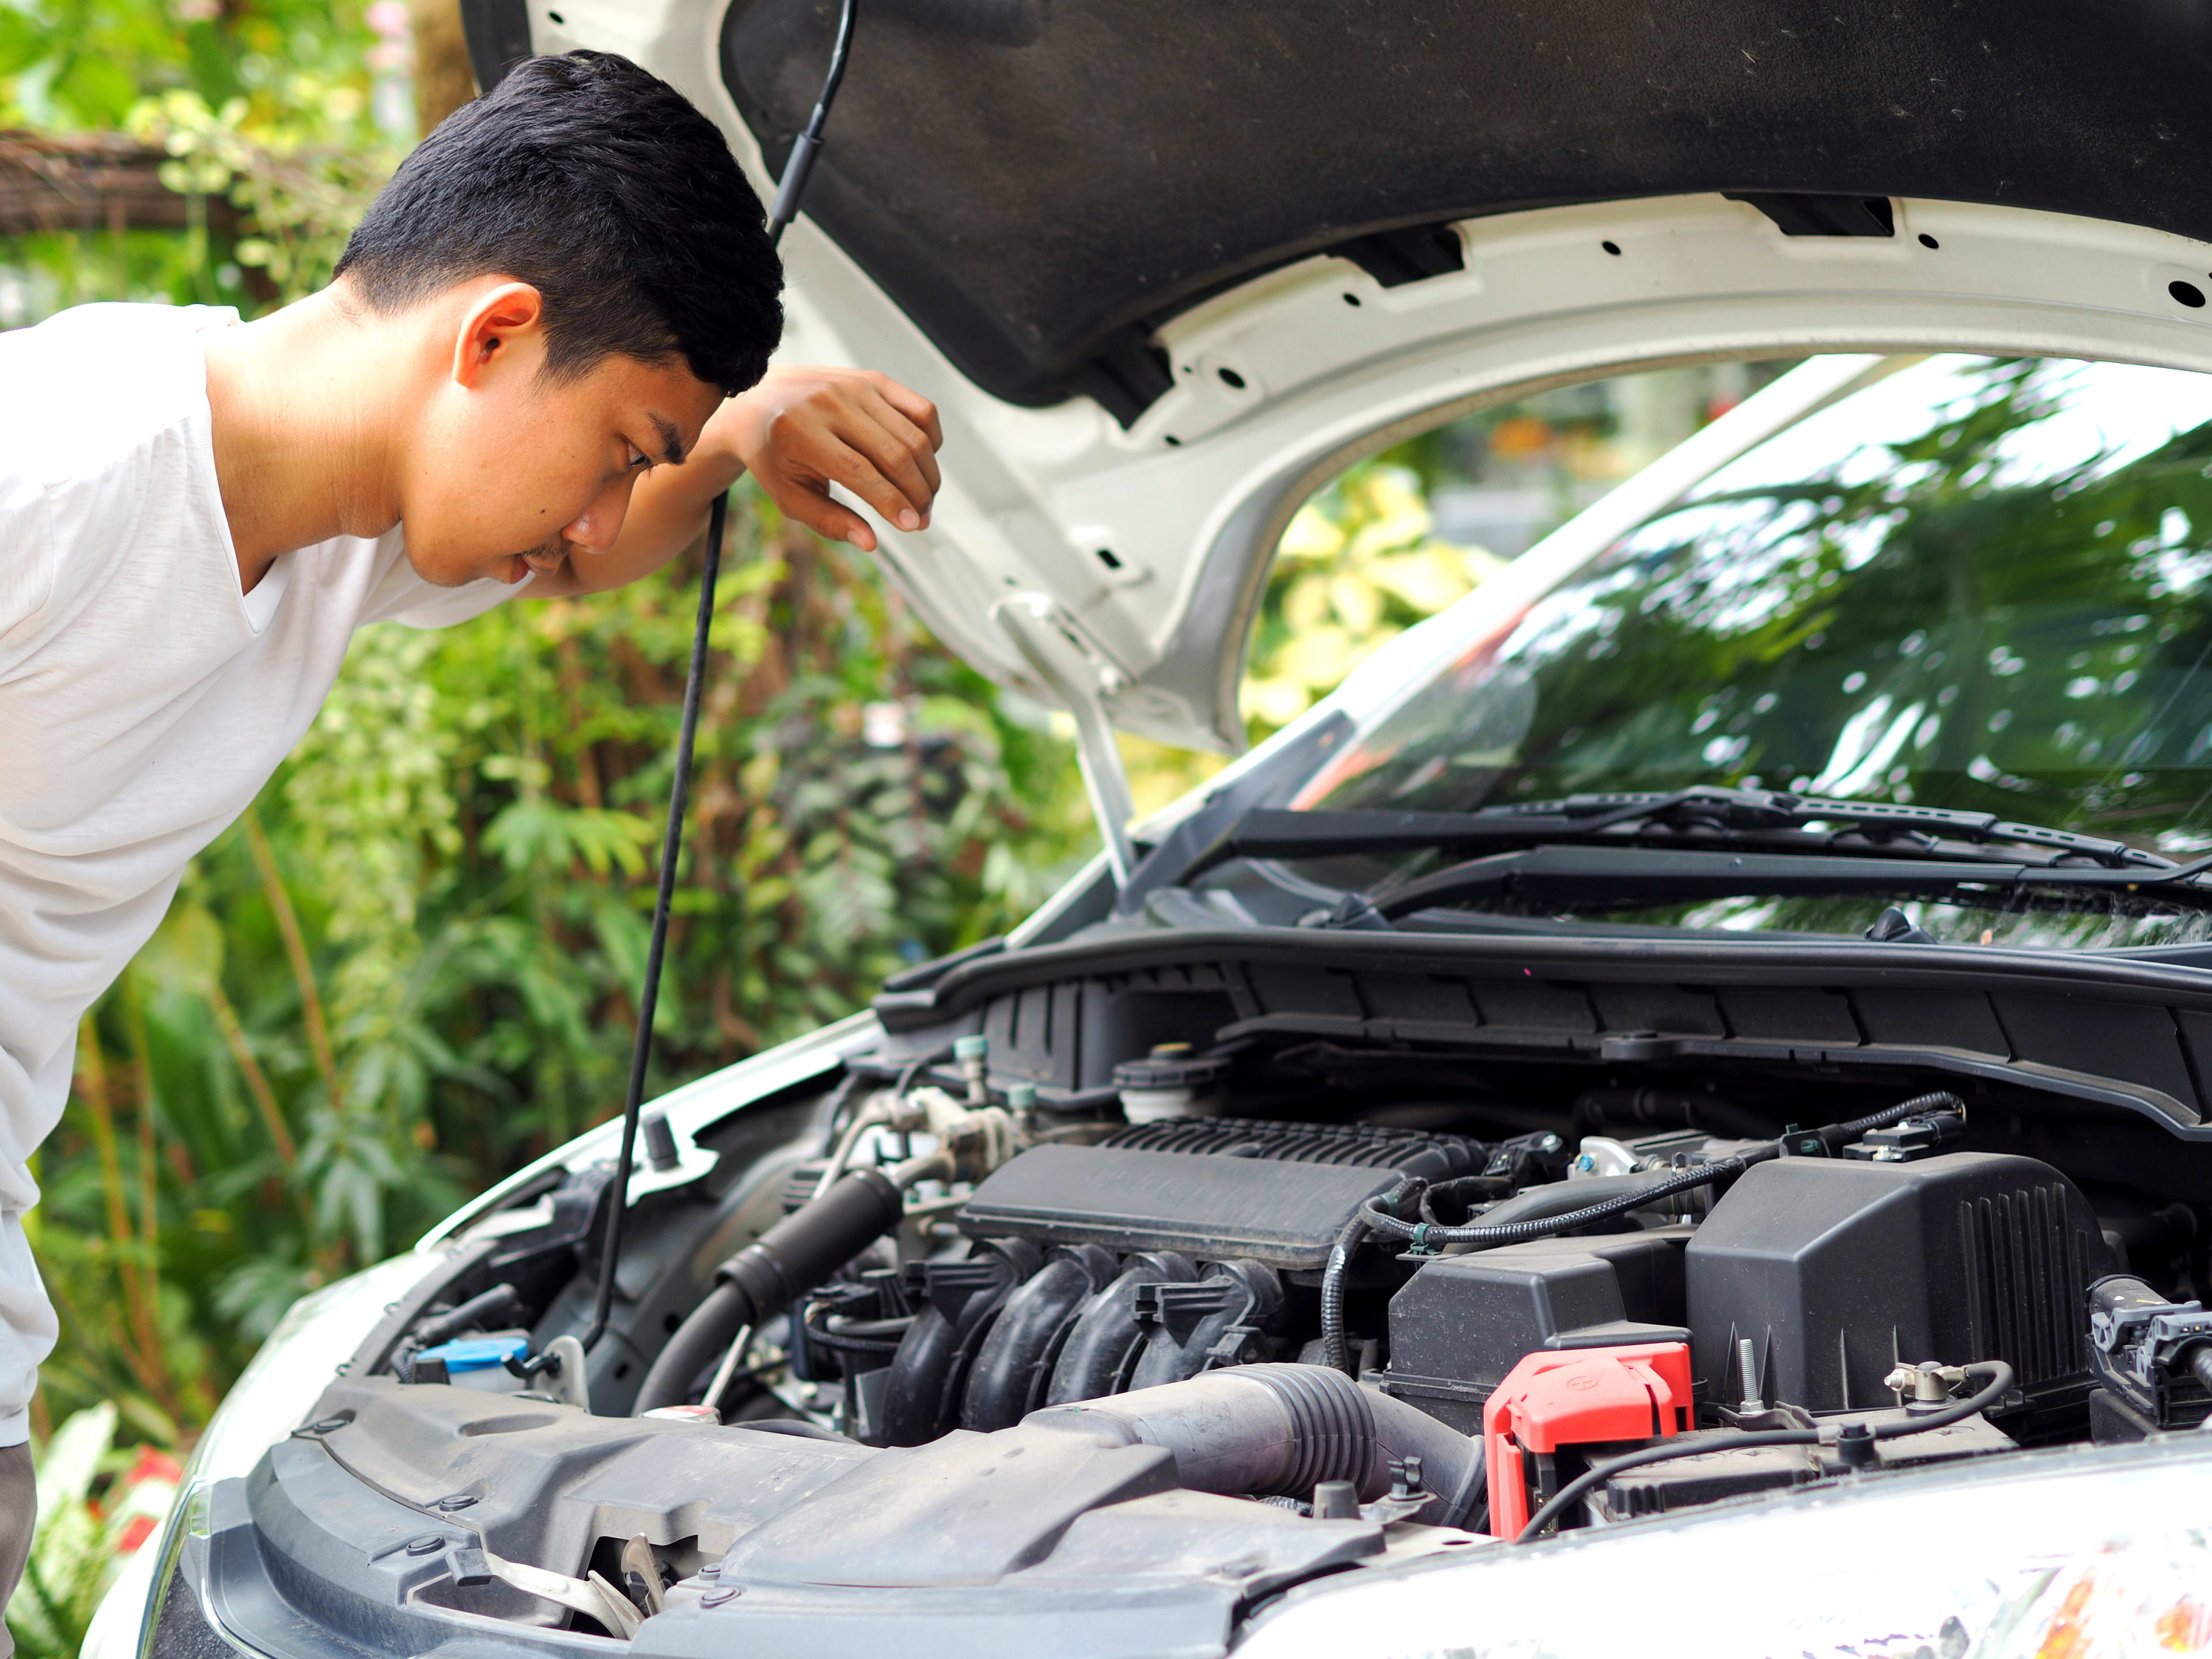 Man in White Tshirt Looking at Engine for Car Maintenance